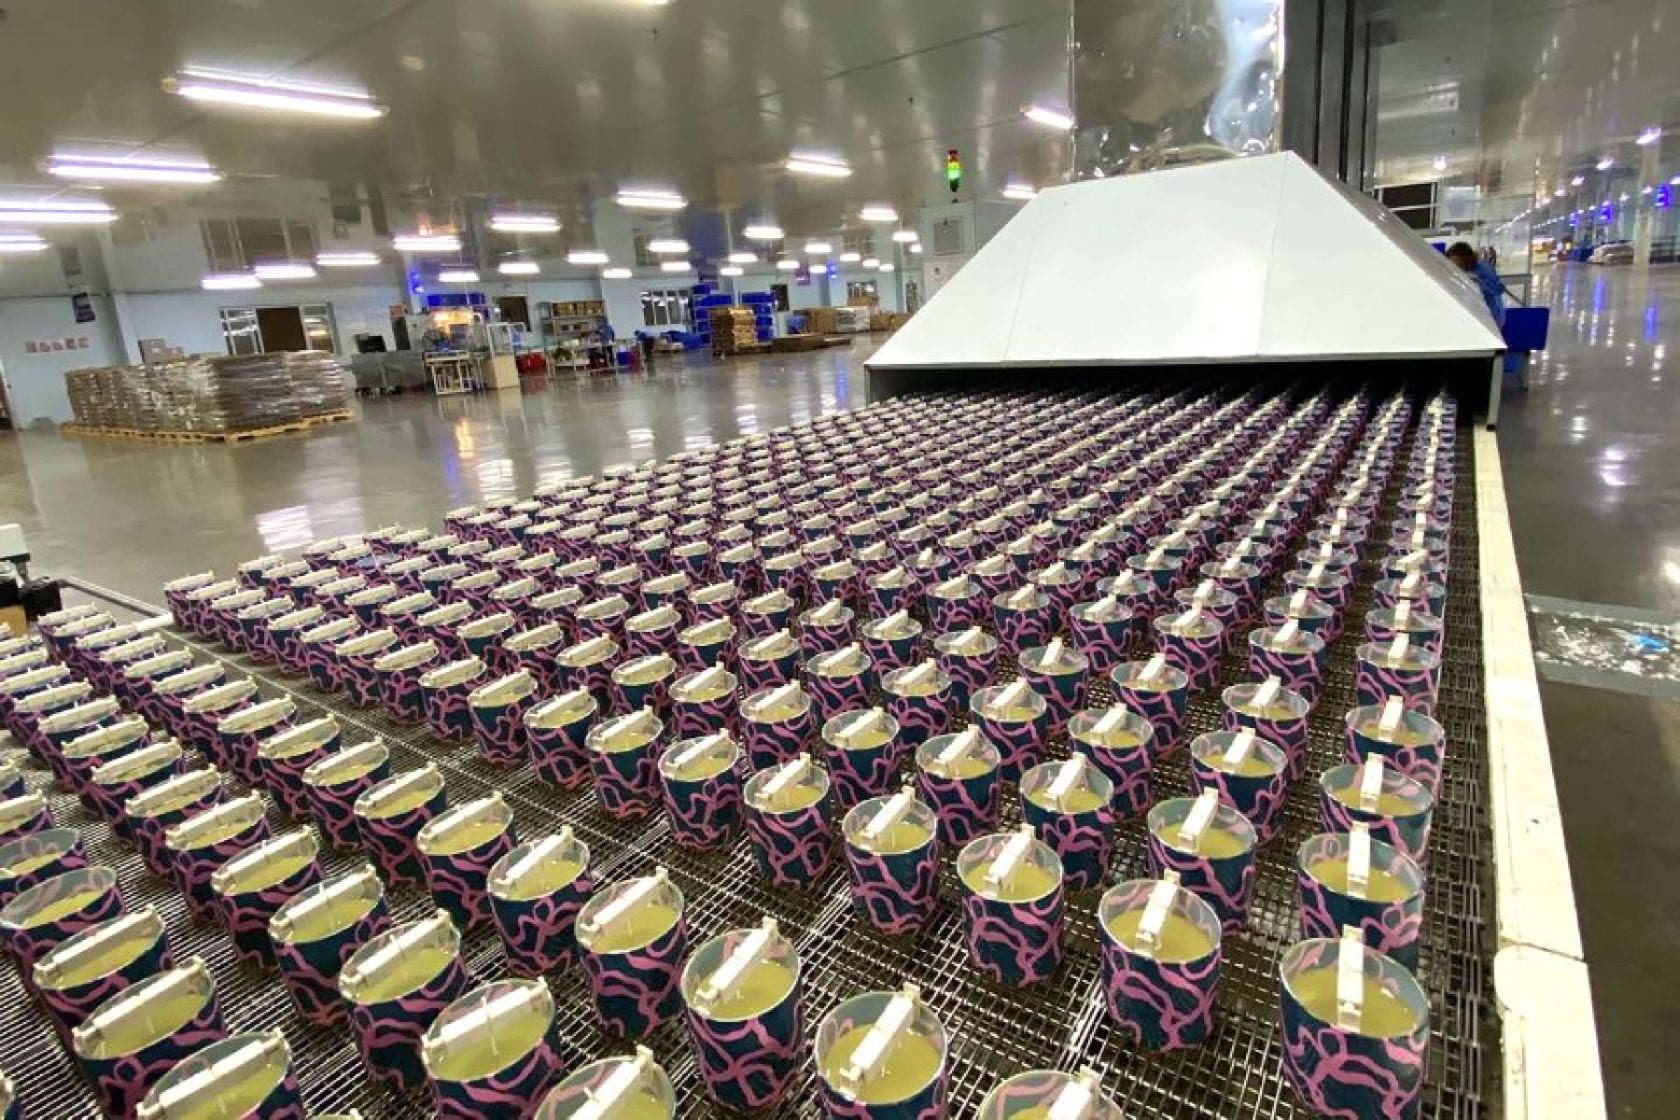 Candles on the assembly line in Vietnam (2020).